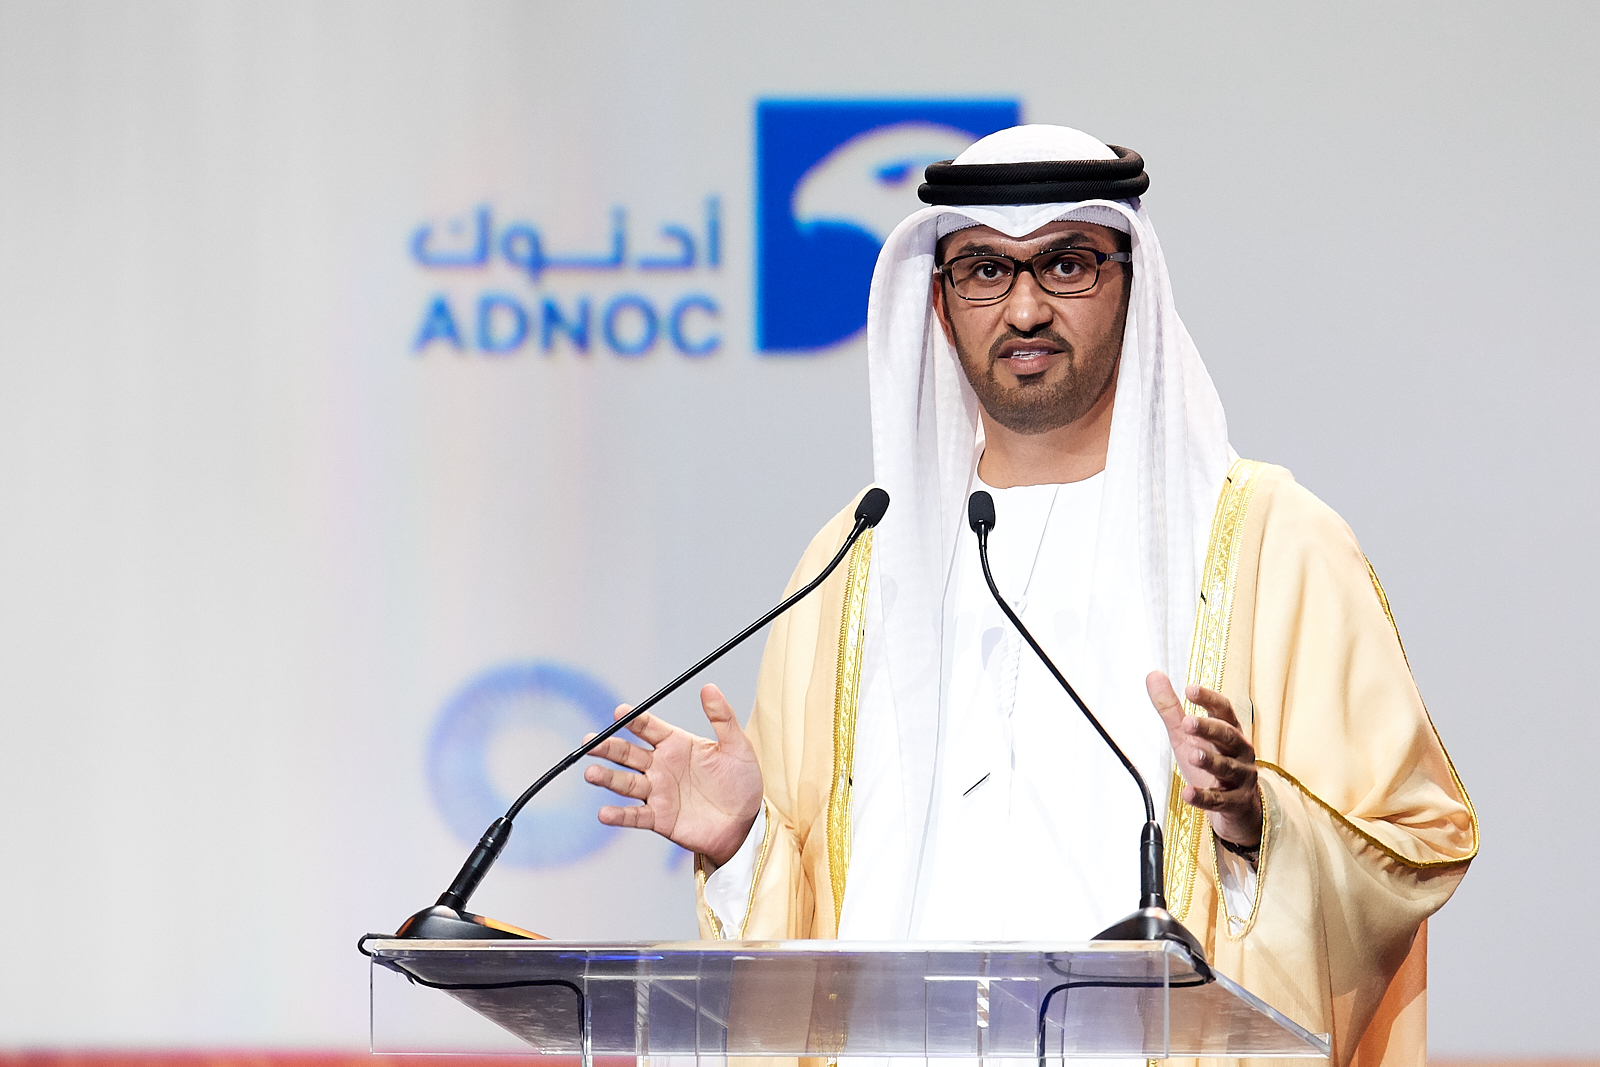 The UAE is ahead in vaccines due to leadership and 'terrific' campaign teams: Sultan Al Jaber declares